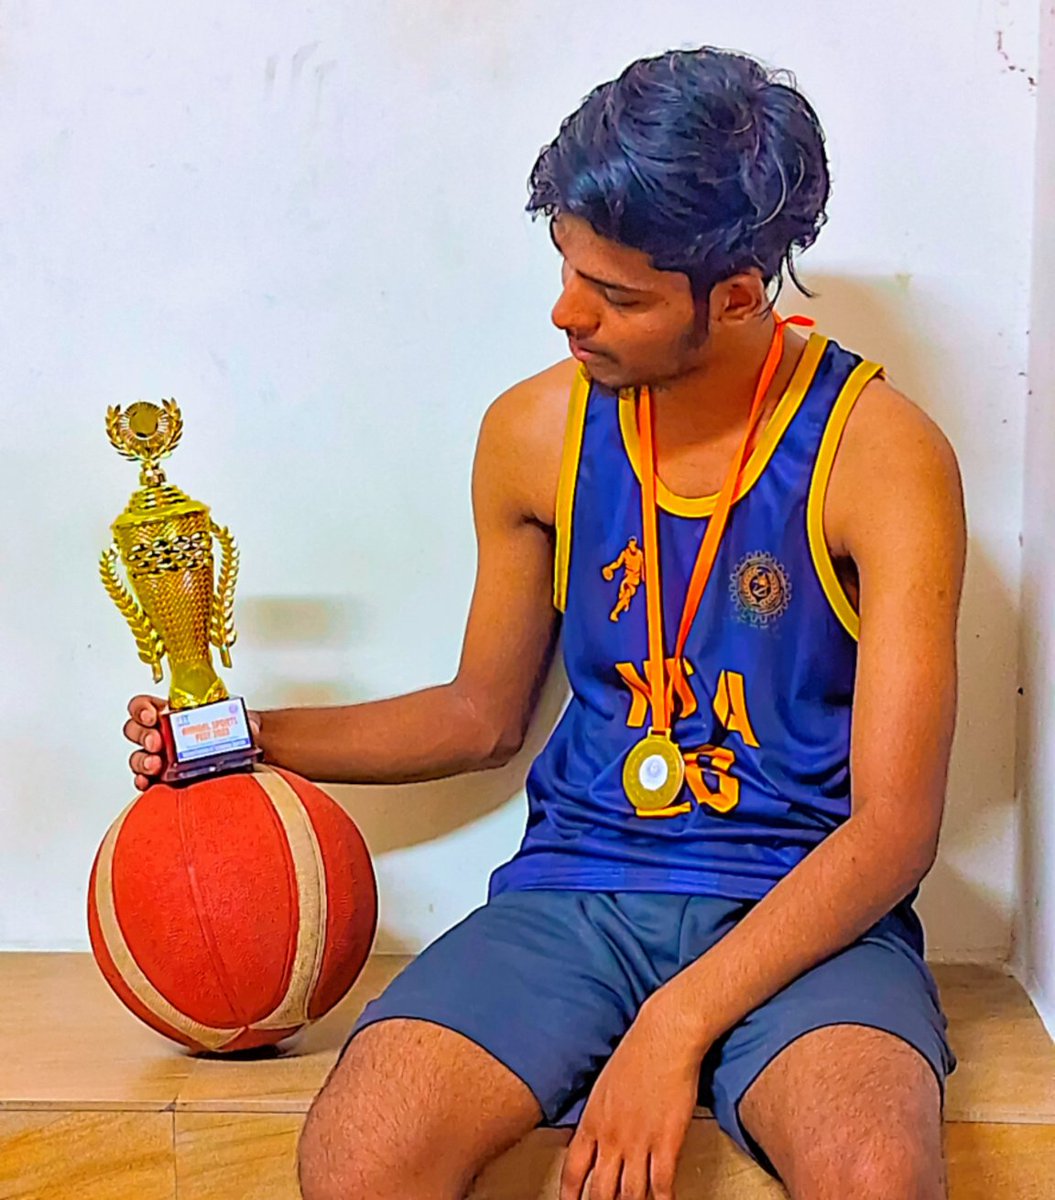 🏀🏆 Proud moment !! We emerged victorious at the Interbranch Basketball Tournament held at National Institute of Technology Agartala! Grateful for the dedication and teamwork that brought us this trophy. 🙌🥇
#Champions #BasketballGlory #NITAgartala #TeamTriumph #basketball